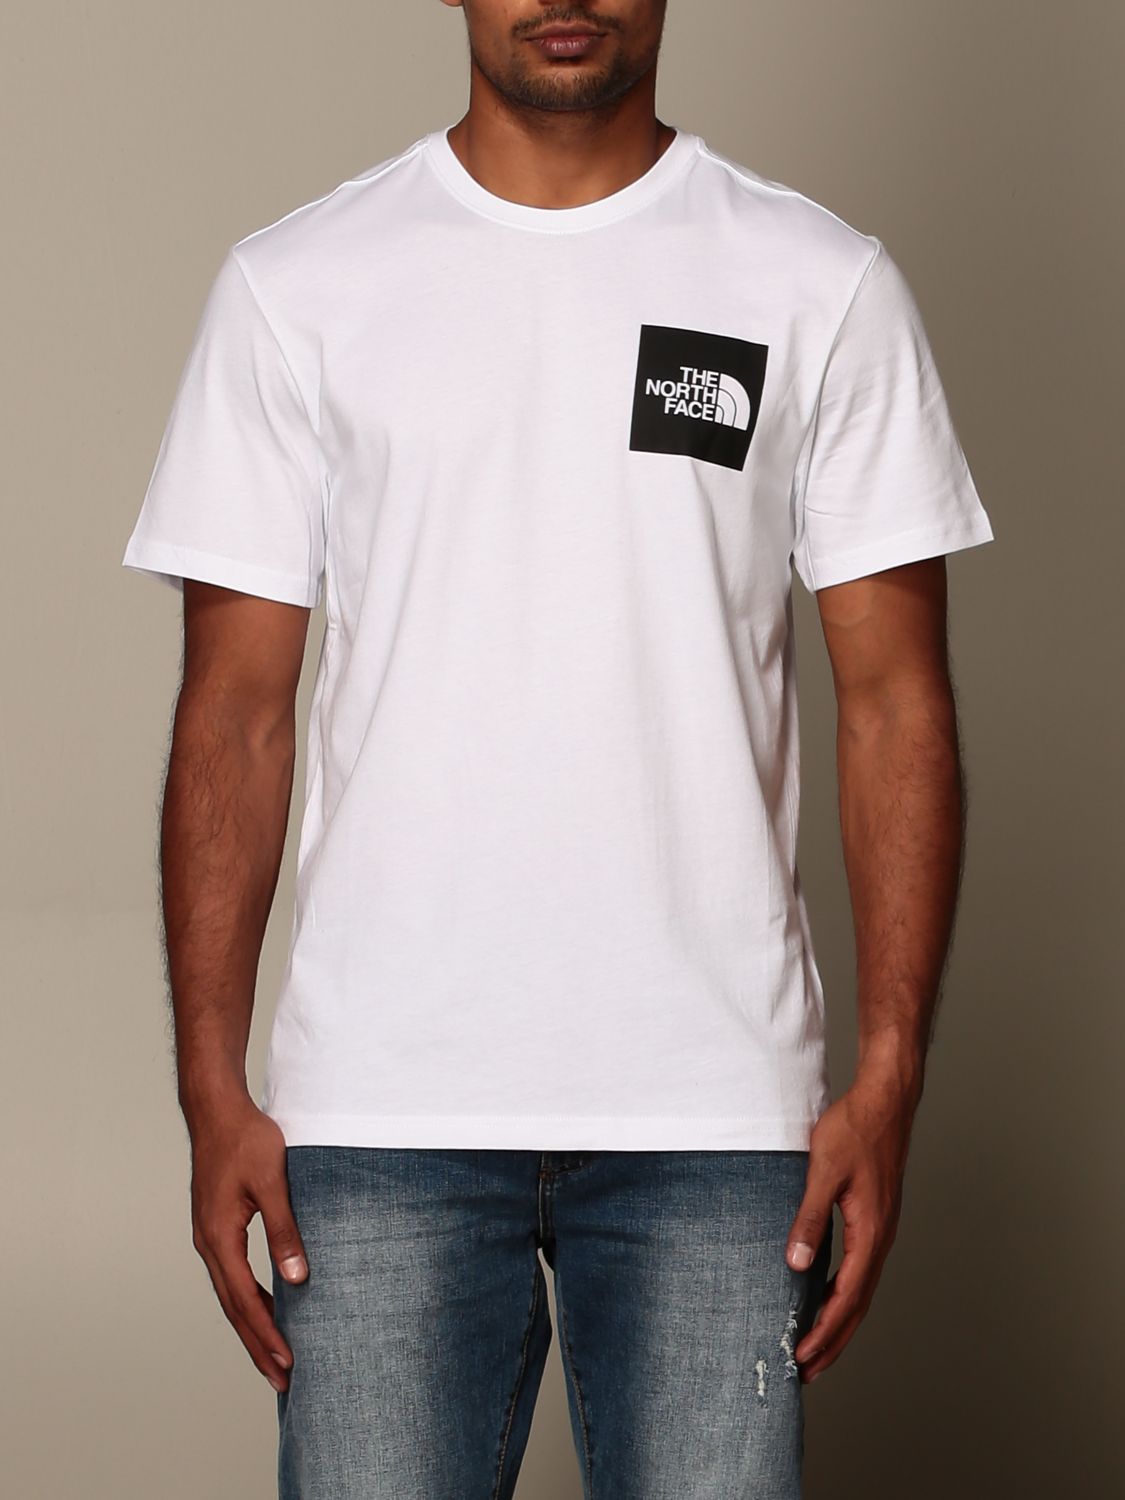 north face white t shirt